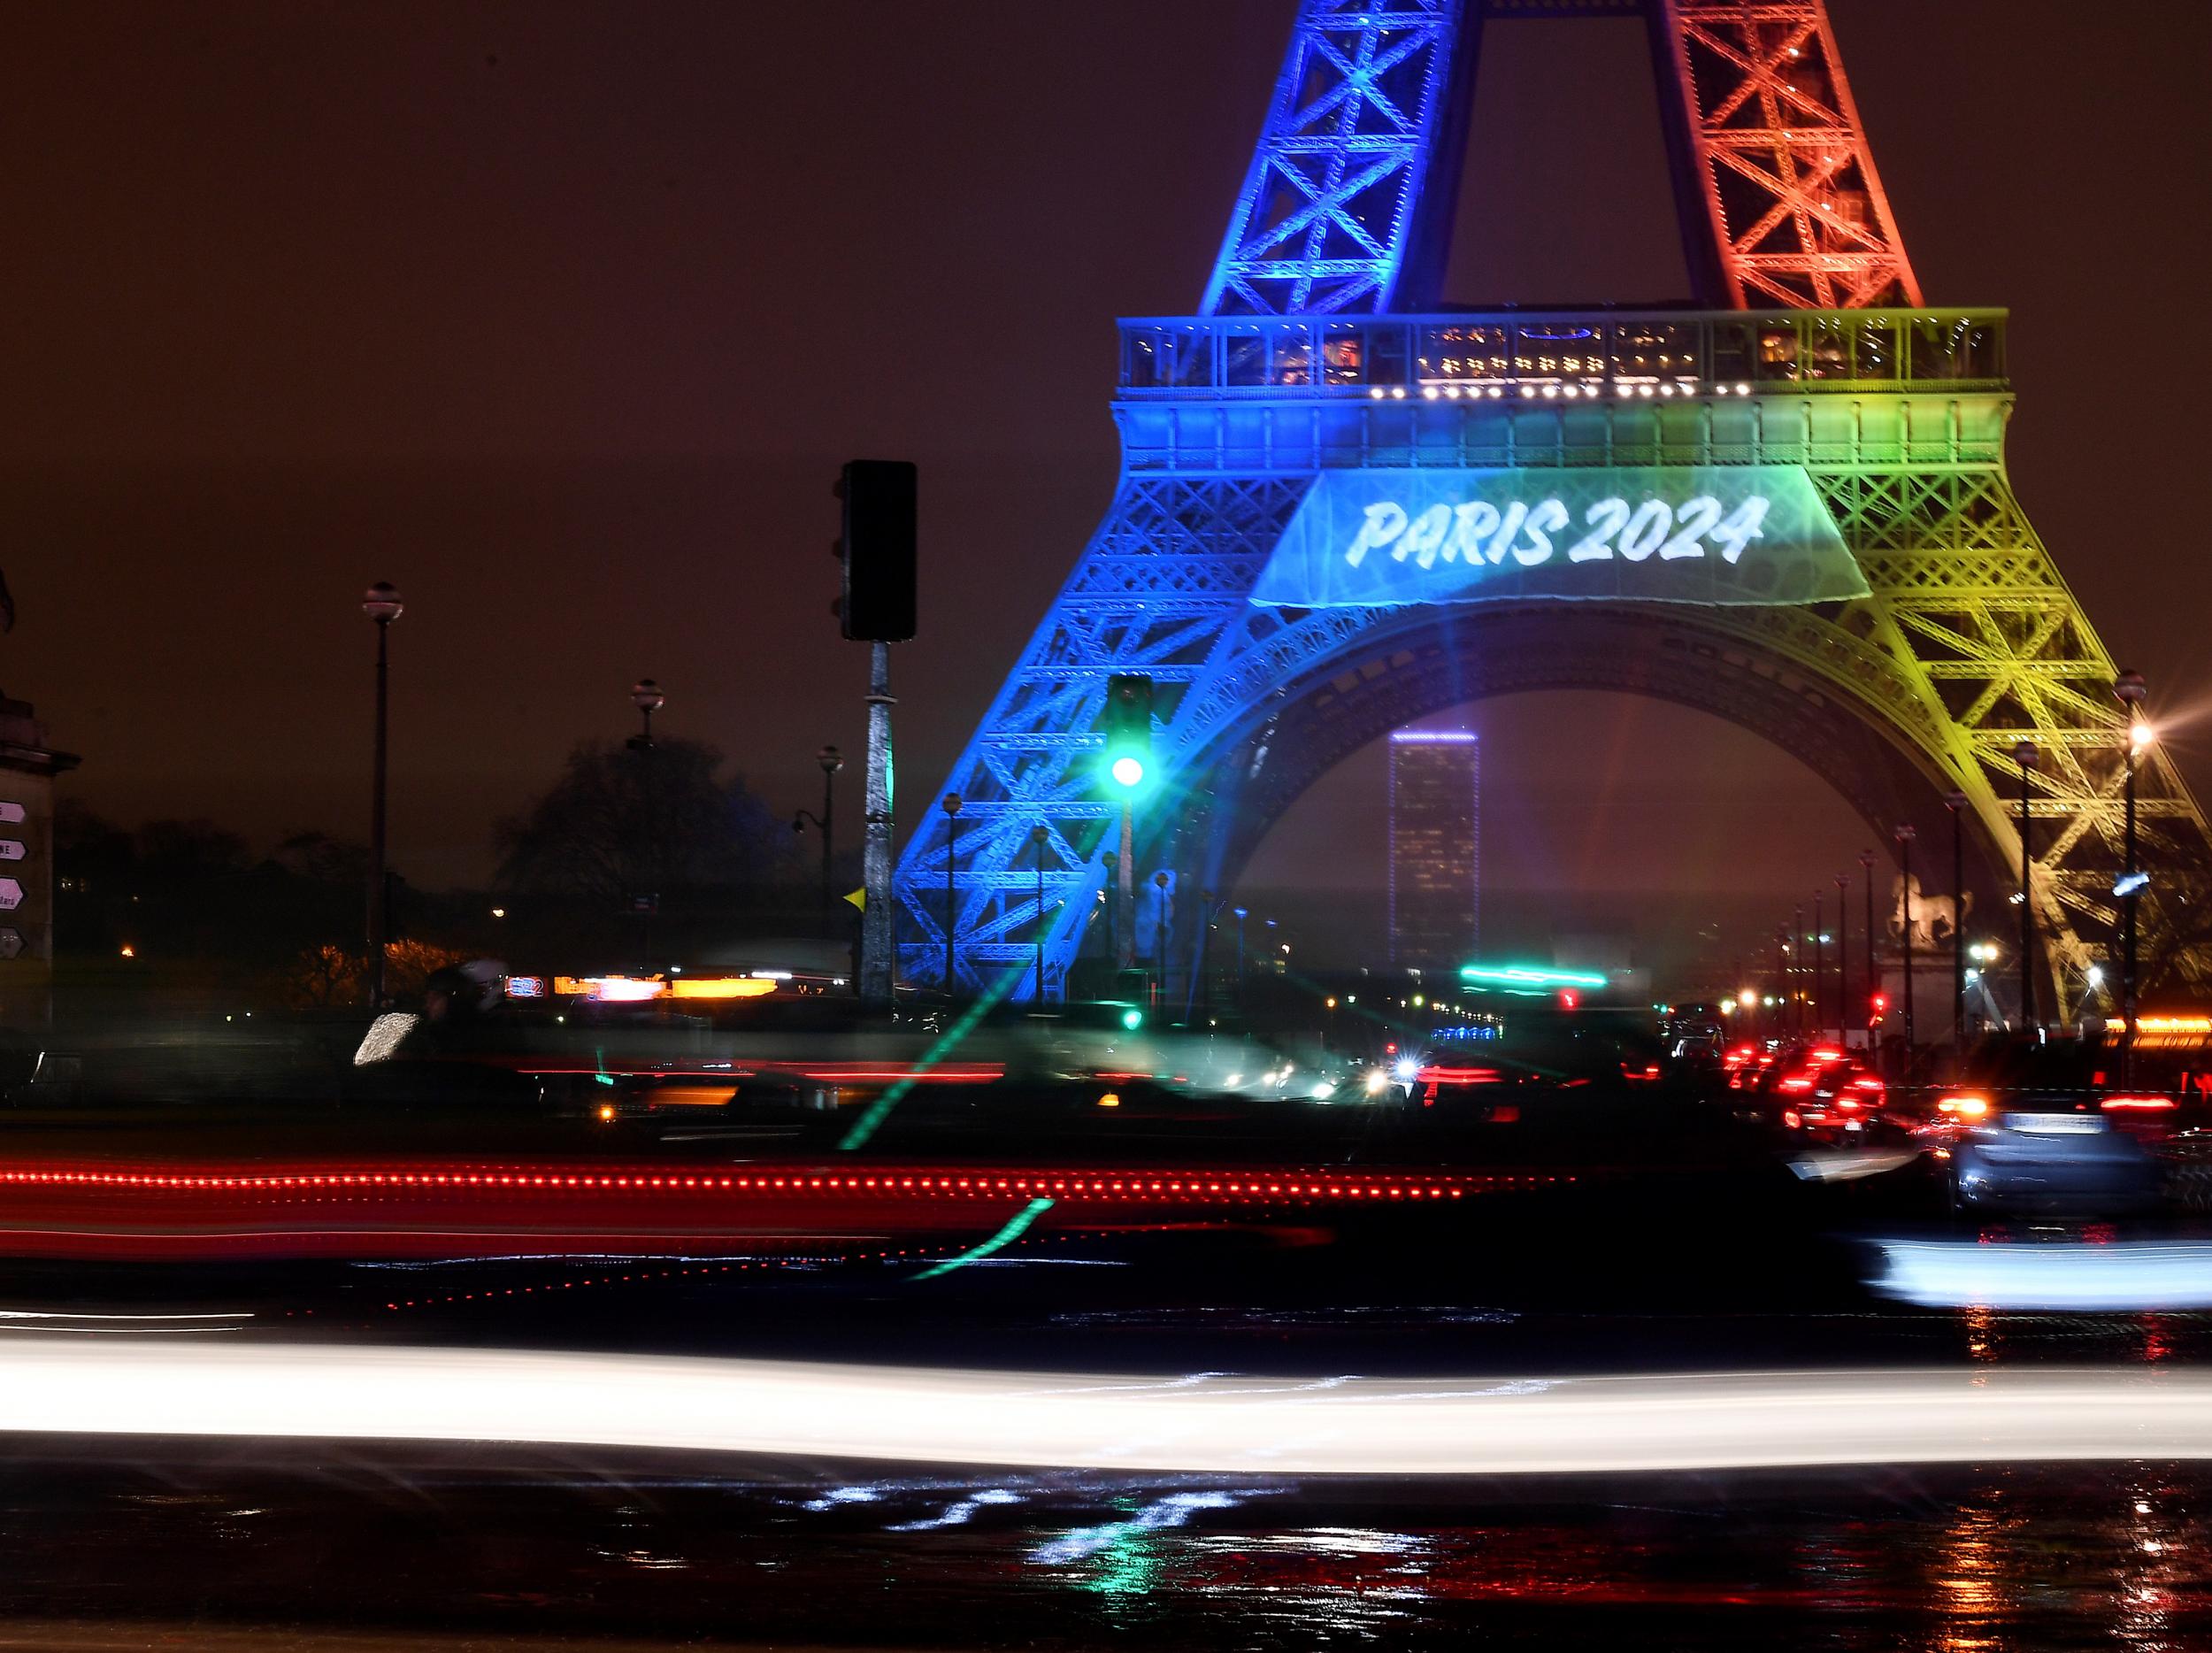 Paris will stage the 2024 Olympic Games